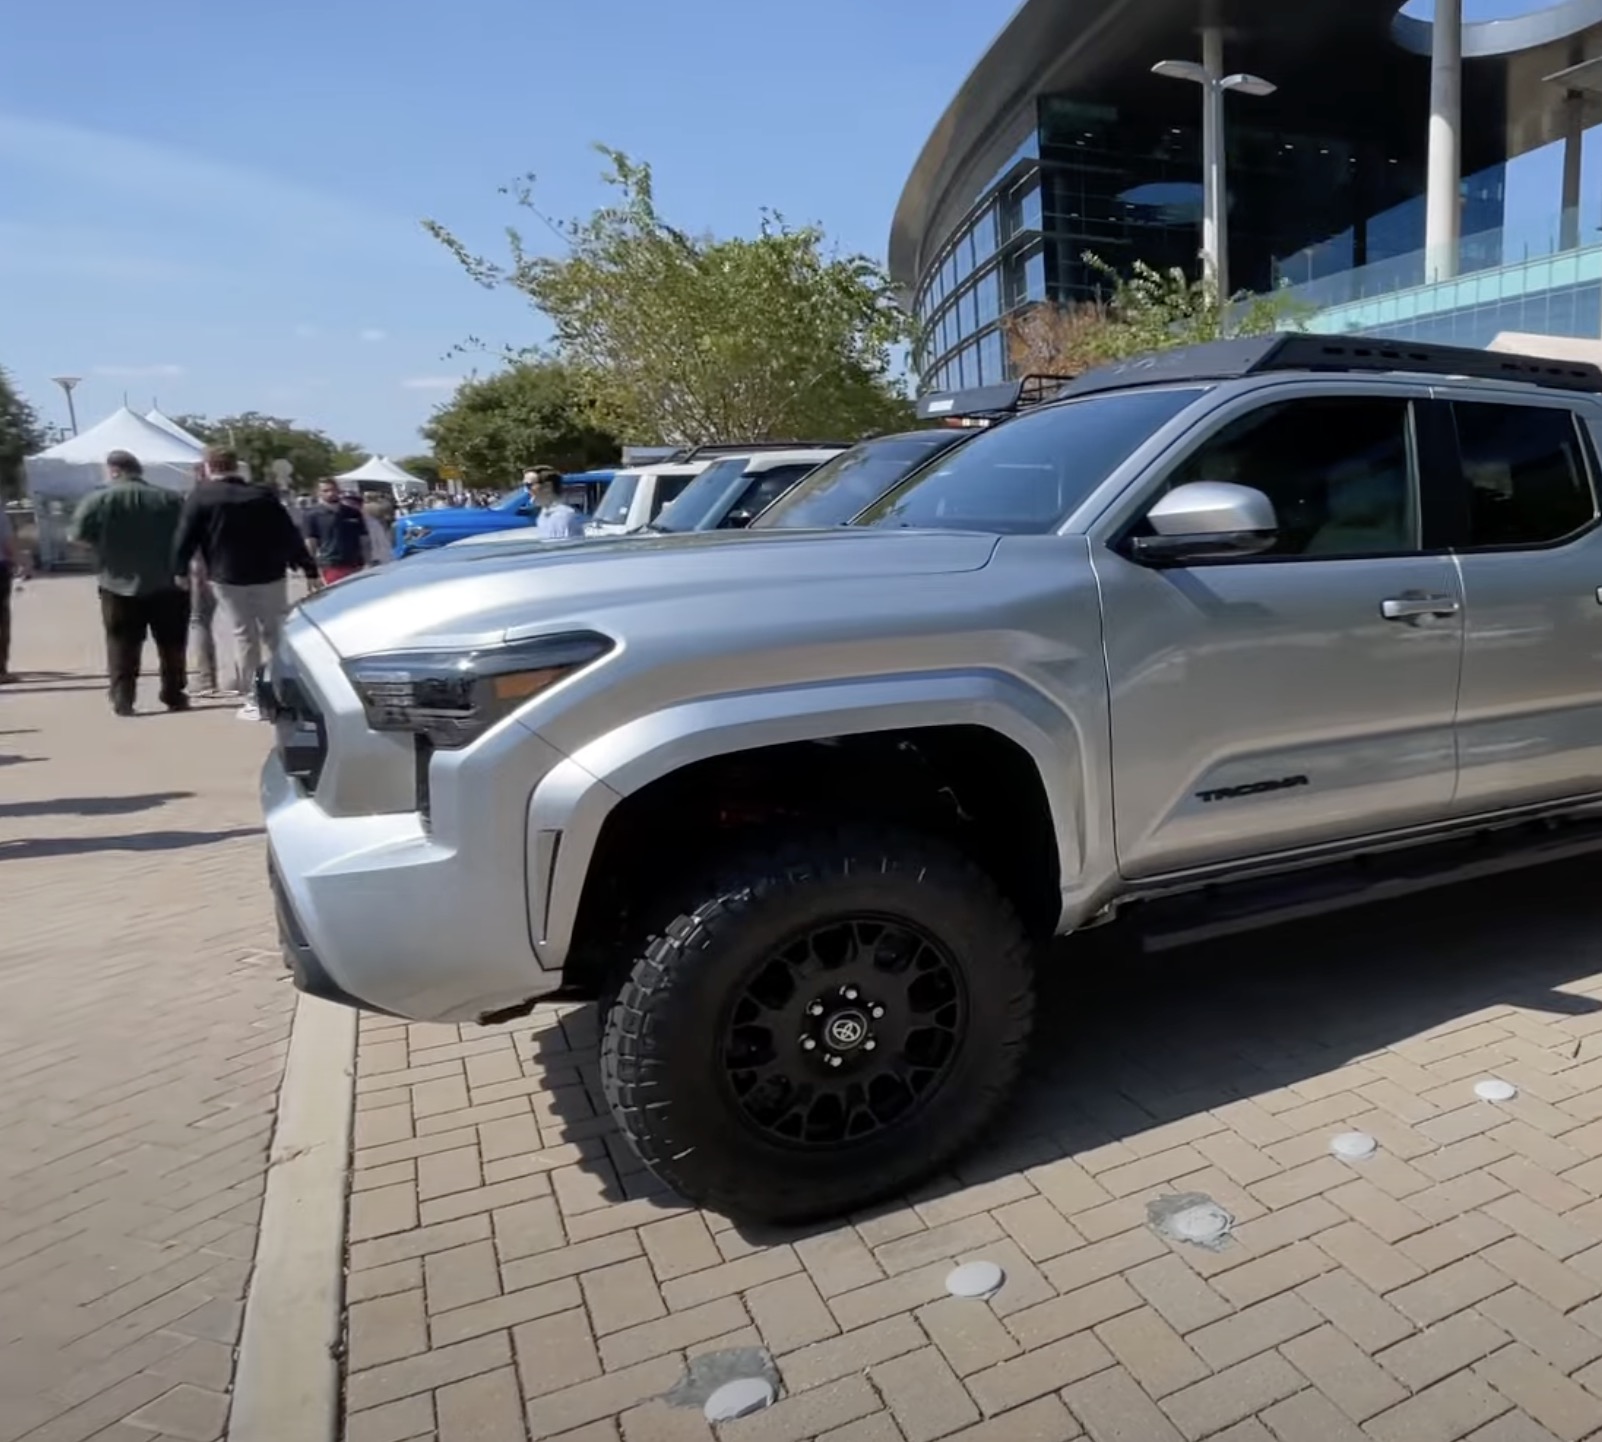 2024 Tacoma Lifted 2024 Tacoma Build (SR5) w/ Toyota Accessories (TRD Lift Kit 2.5" Front / 2" Rear, Wheels, Exhaust, Bed Tire Carrier, Skid Plate, Etc)! Celestial Silver 2024 Tacom SR5 TRD Lift Kit 2.5 2.0 inches springs struts build 2